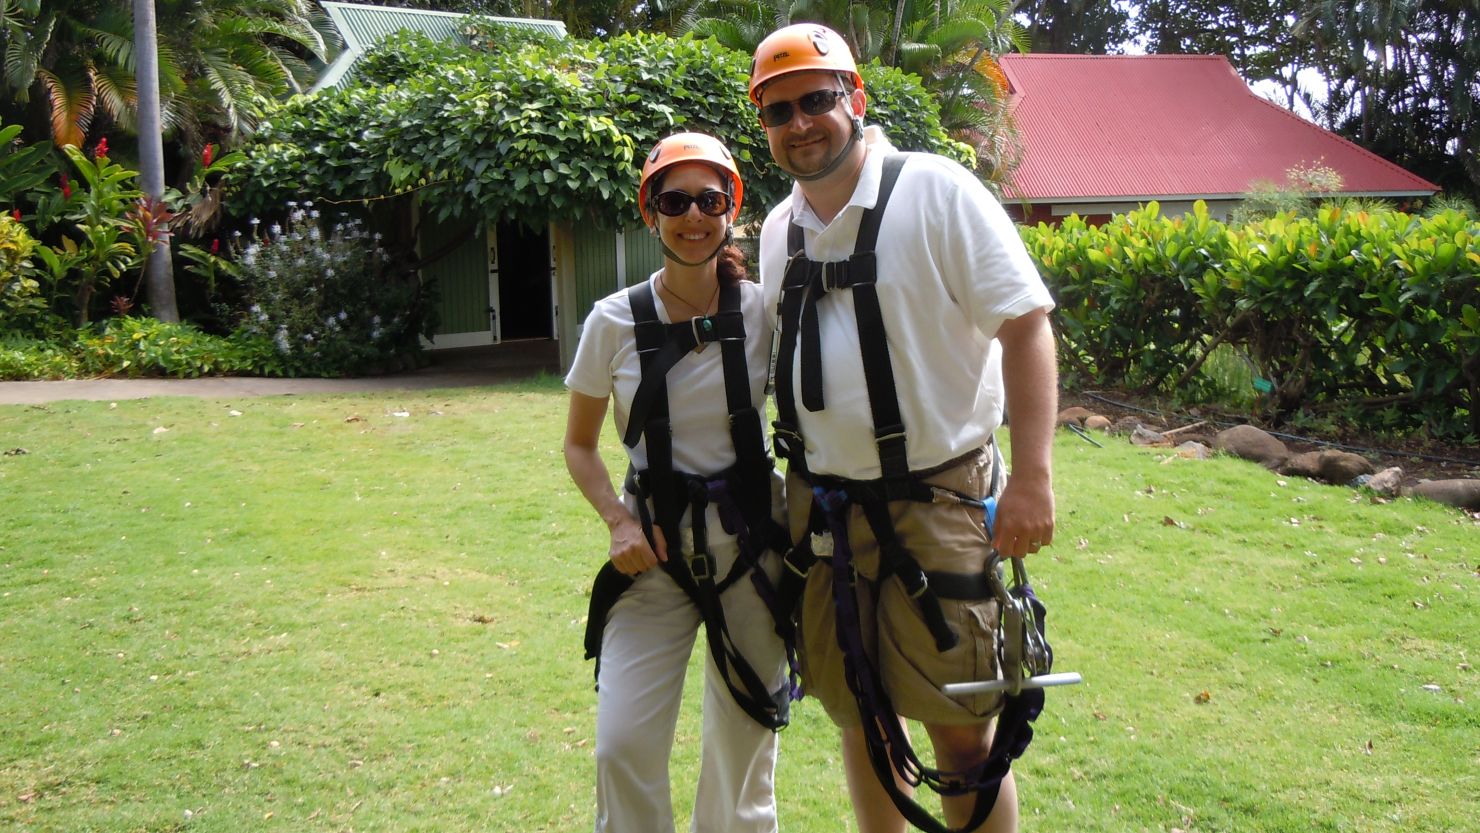 Doug Yakich and his wife, Jacqueline Jordan, went ziplining on a trip to Hawaii in 2011, just six months after his ostomy surgery.